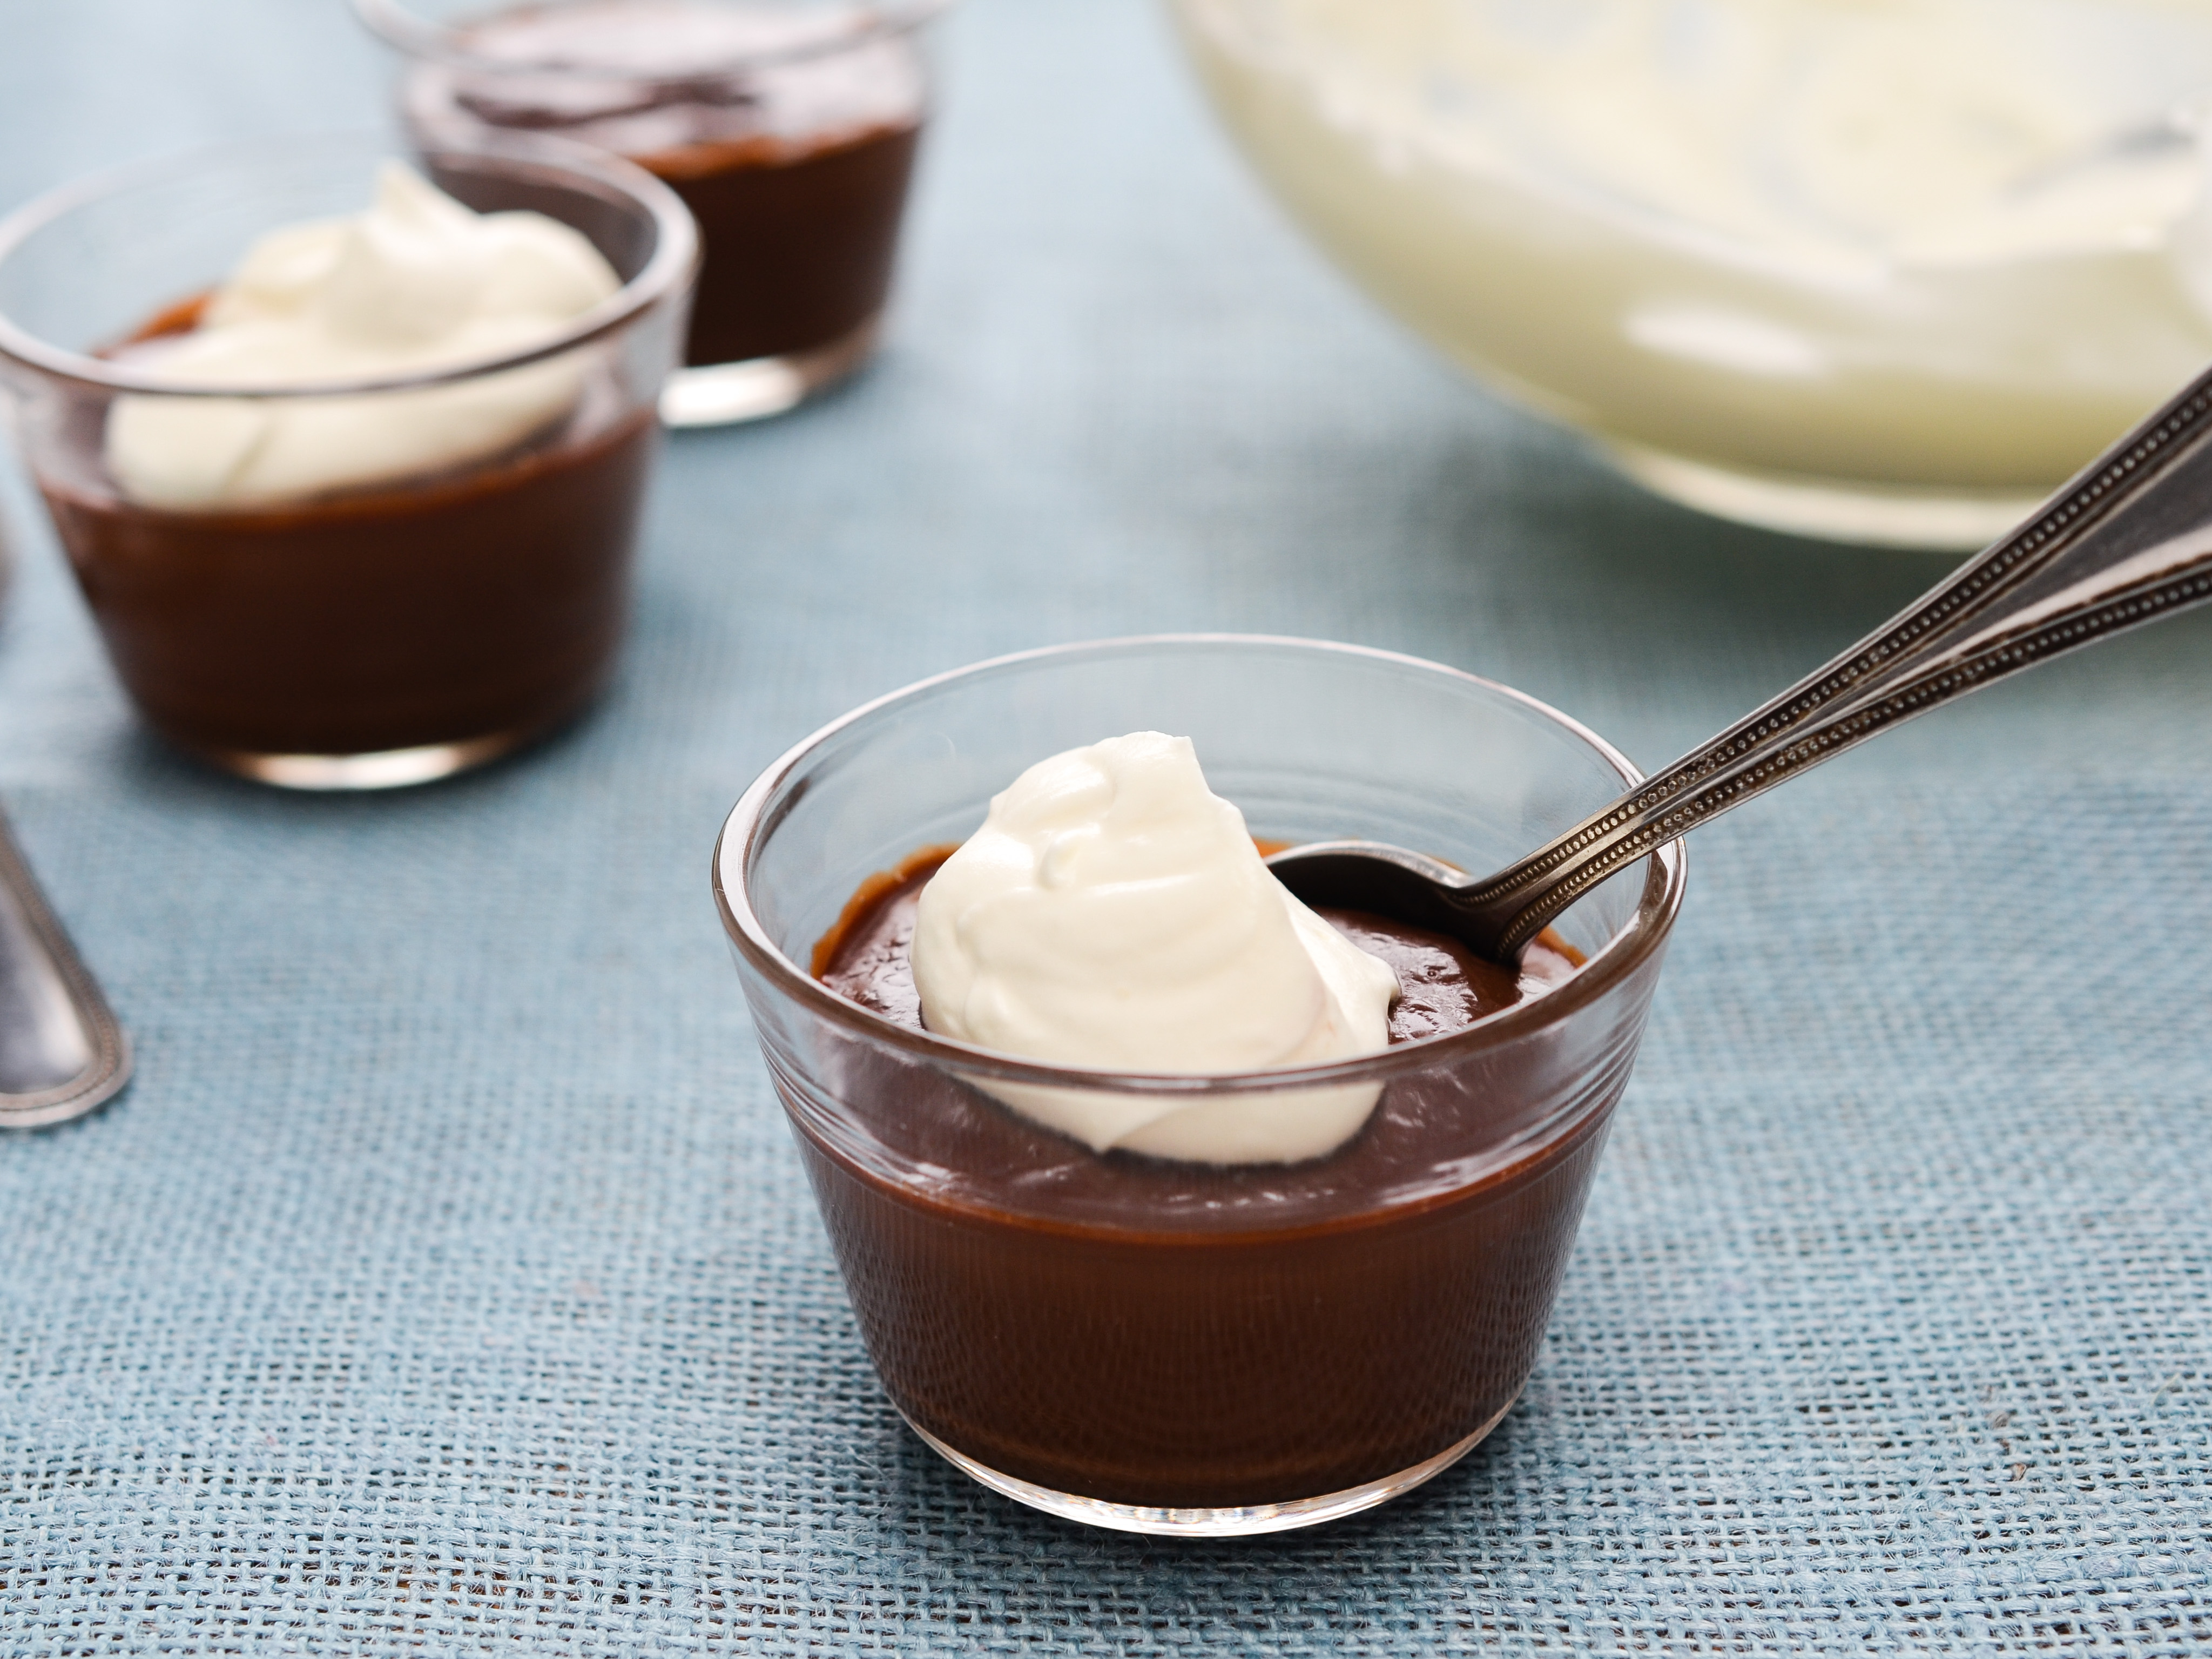 Virginia Willis' Smooth and Creamy Chocolate Pudding for FoodNetwork.com